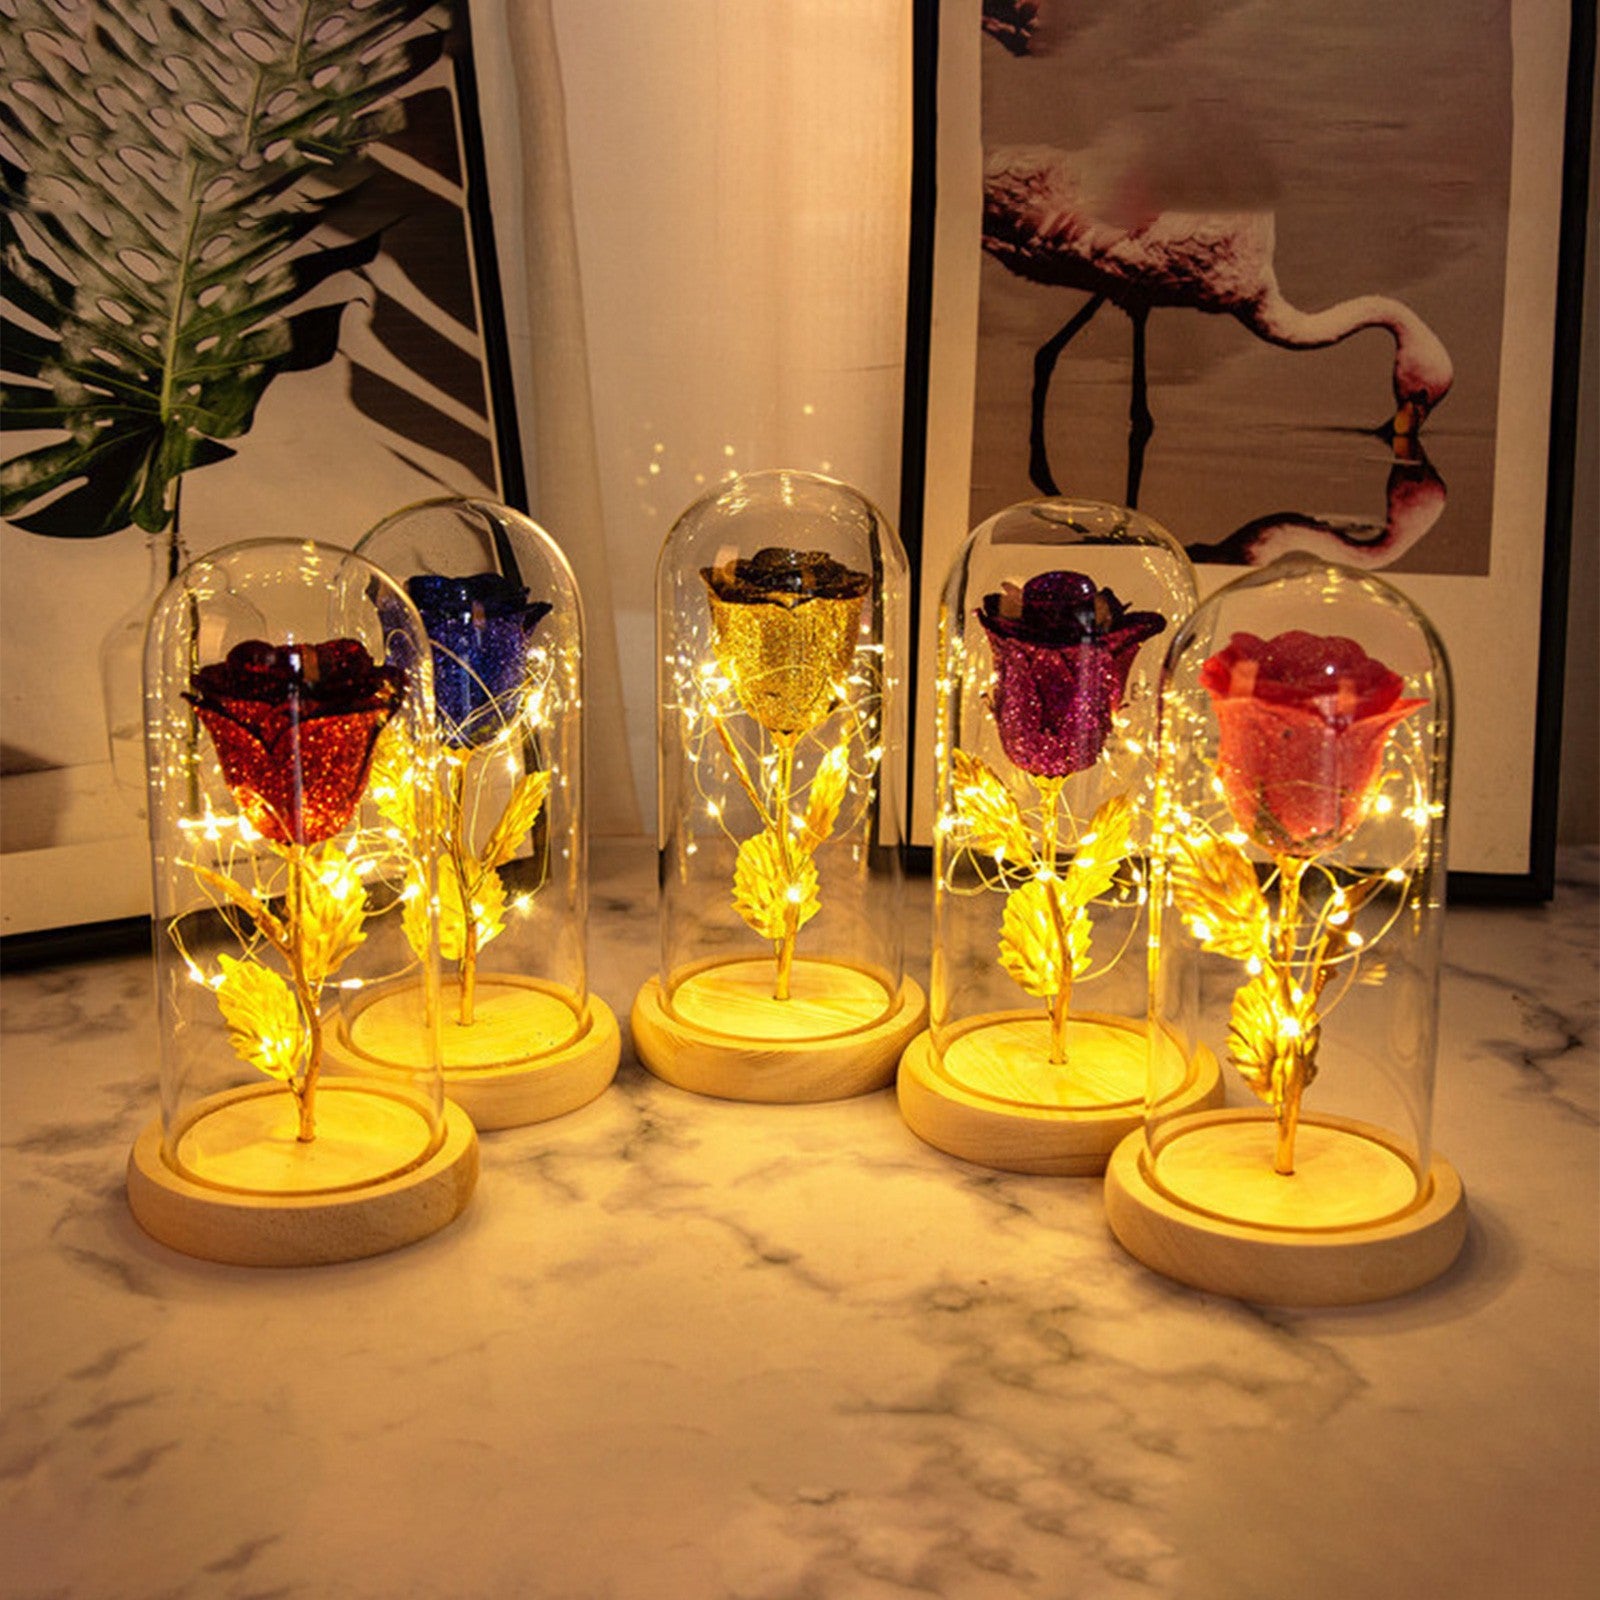  "Eternal Rose Flowers LED Light in Glass Cover - Perfect Day Valentine's Day Gift for Girlfriend"